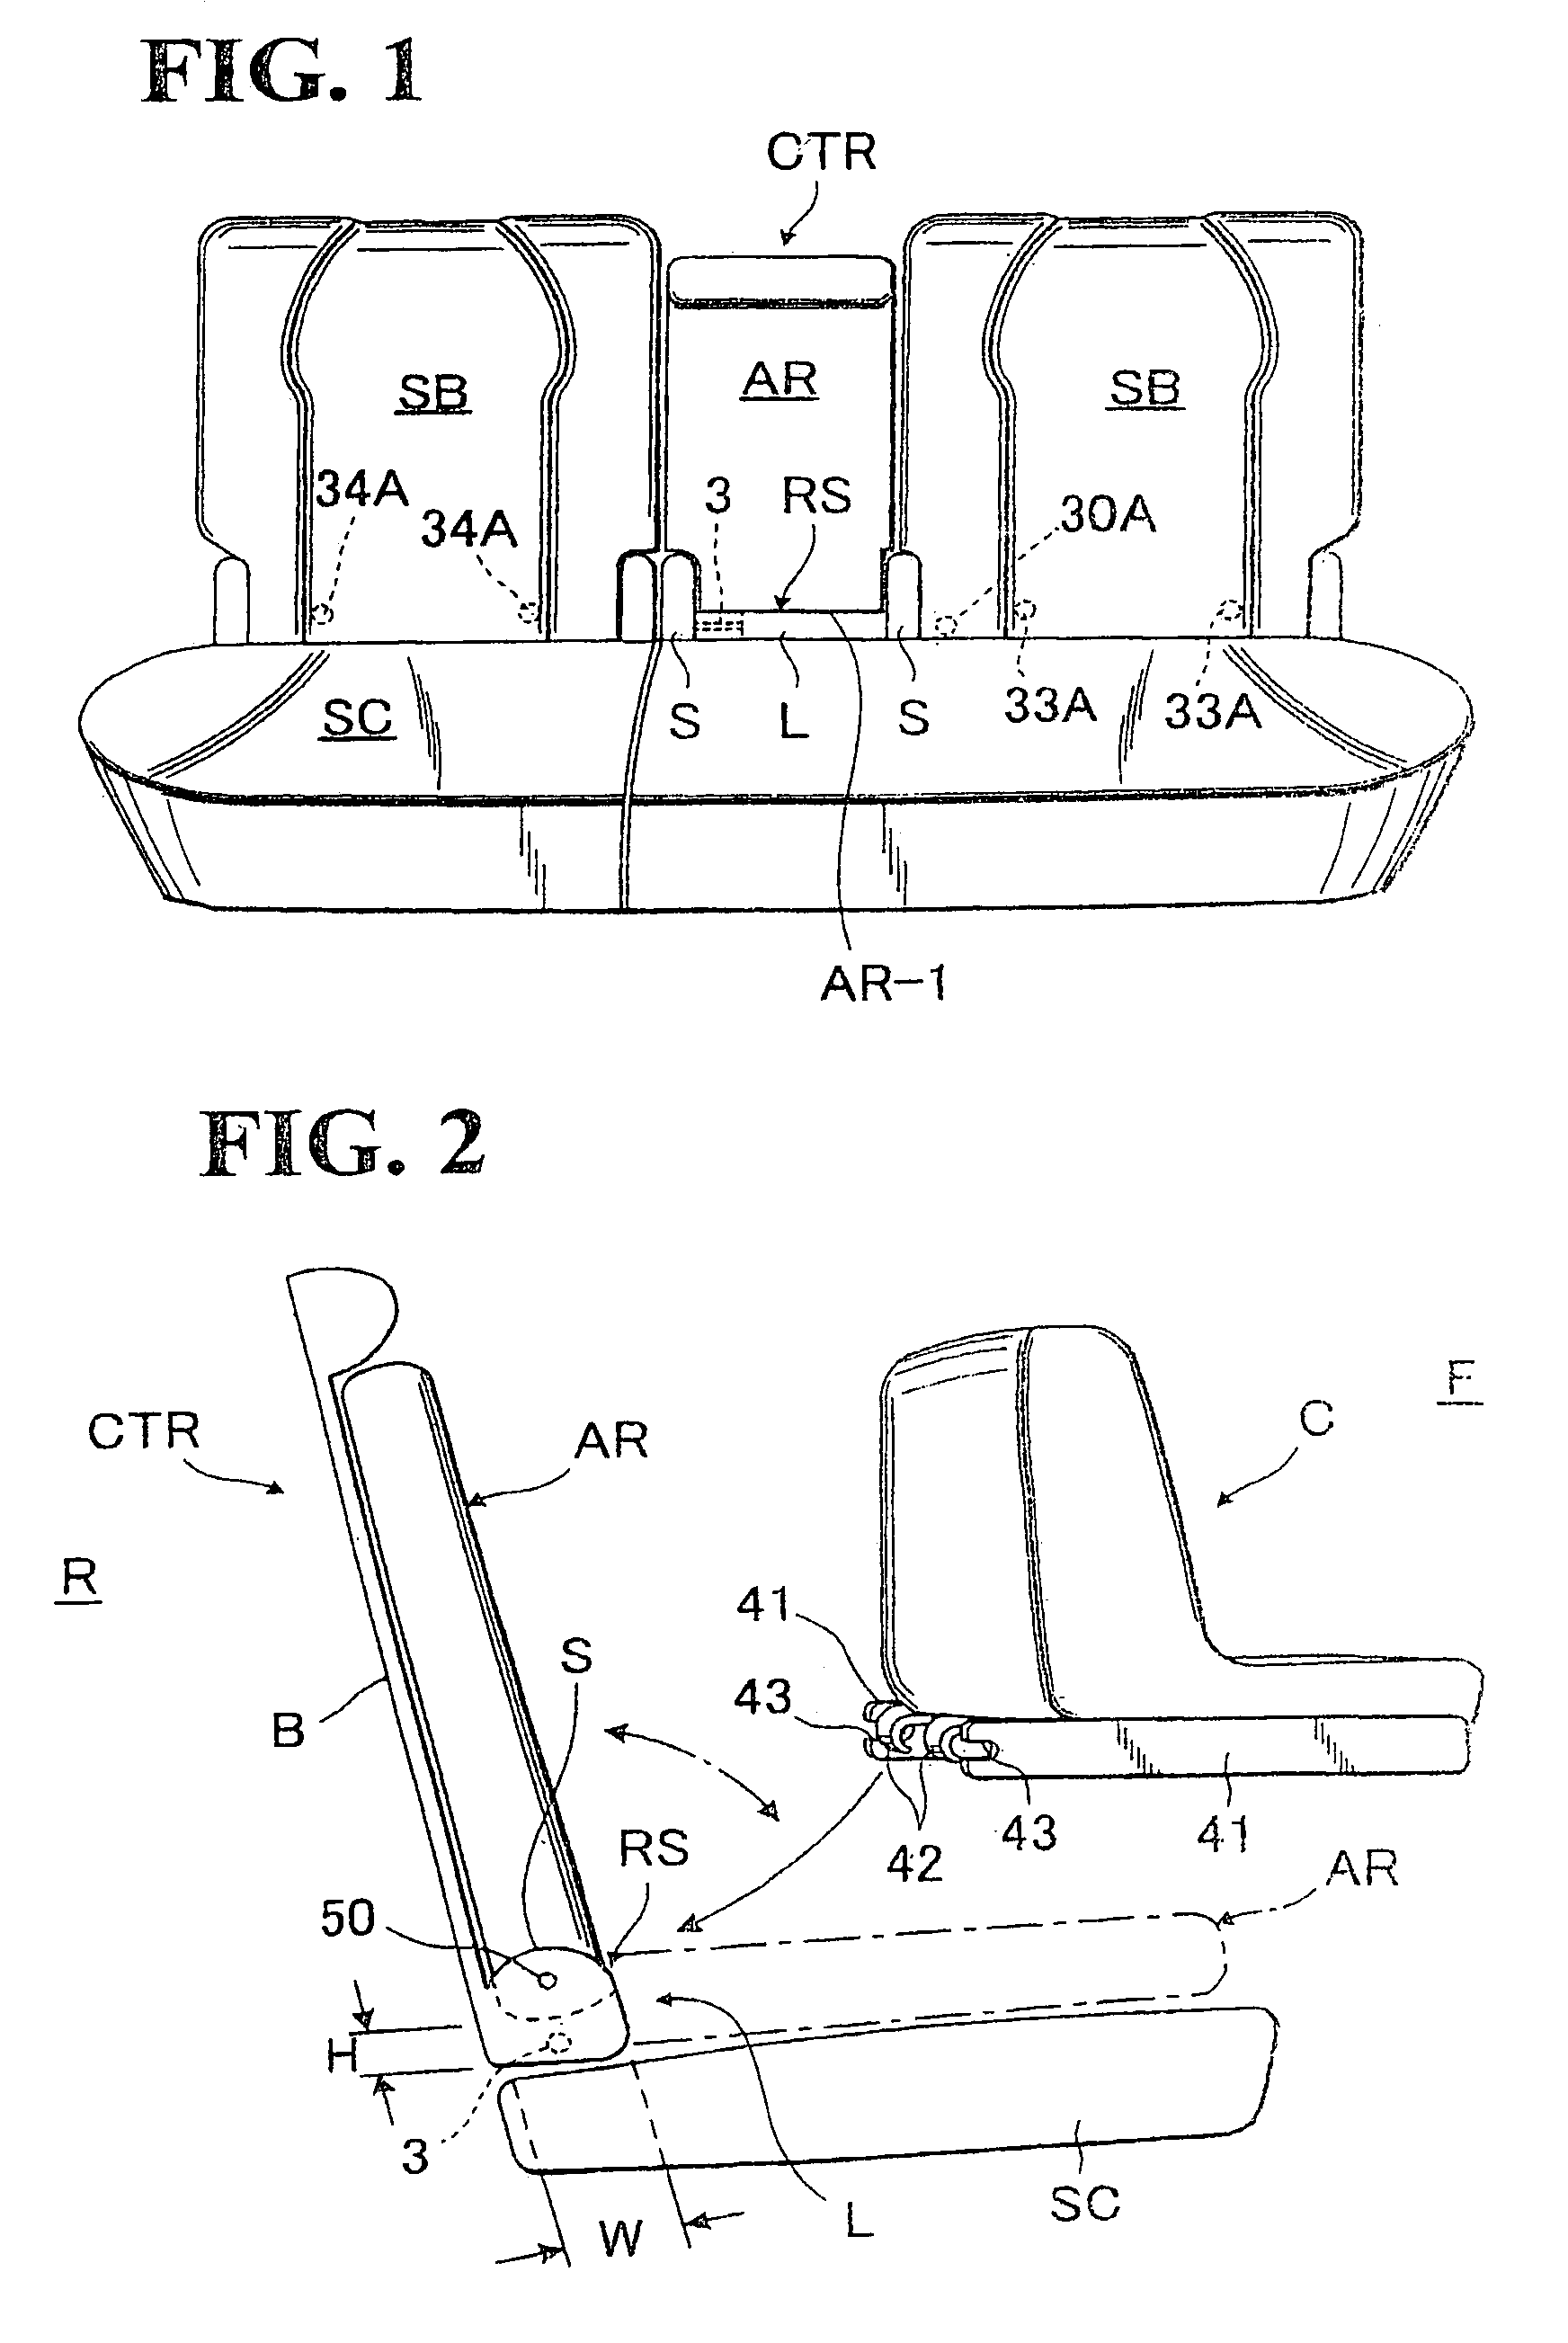 Automotive seat for mounting child seat thereon